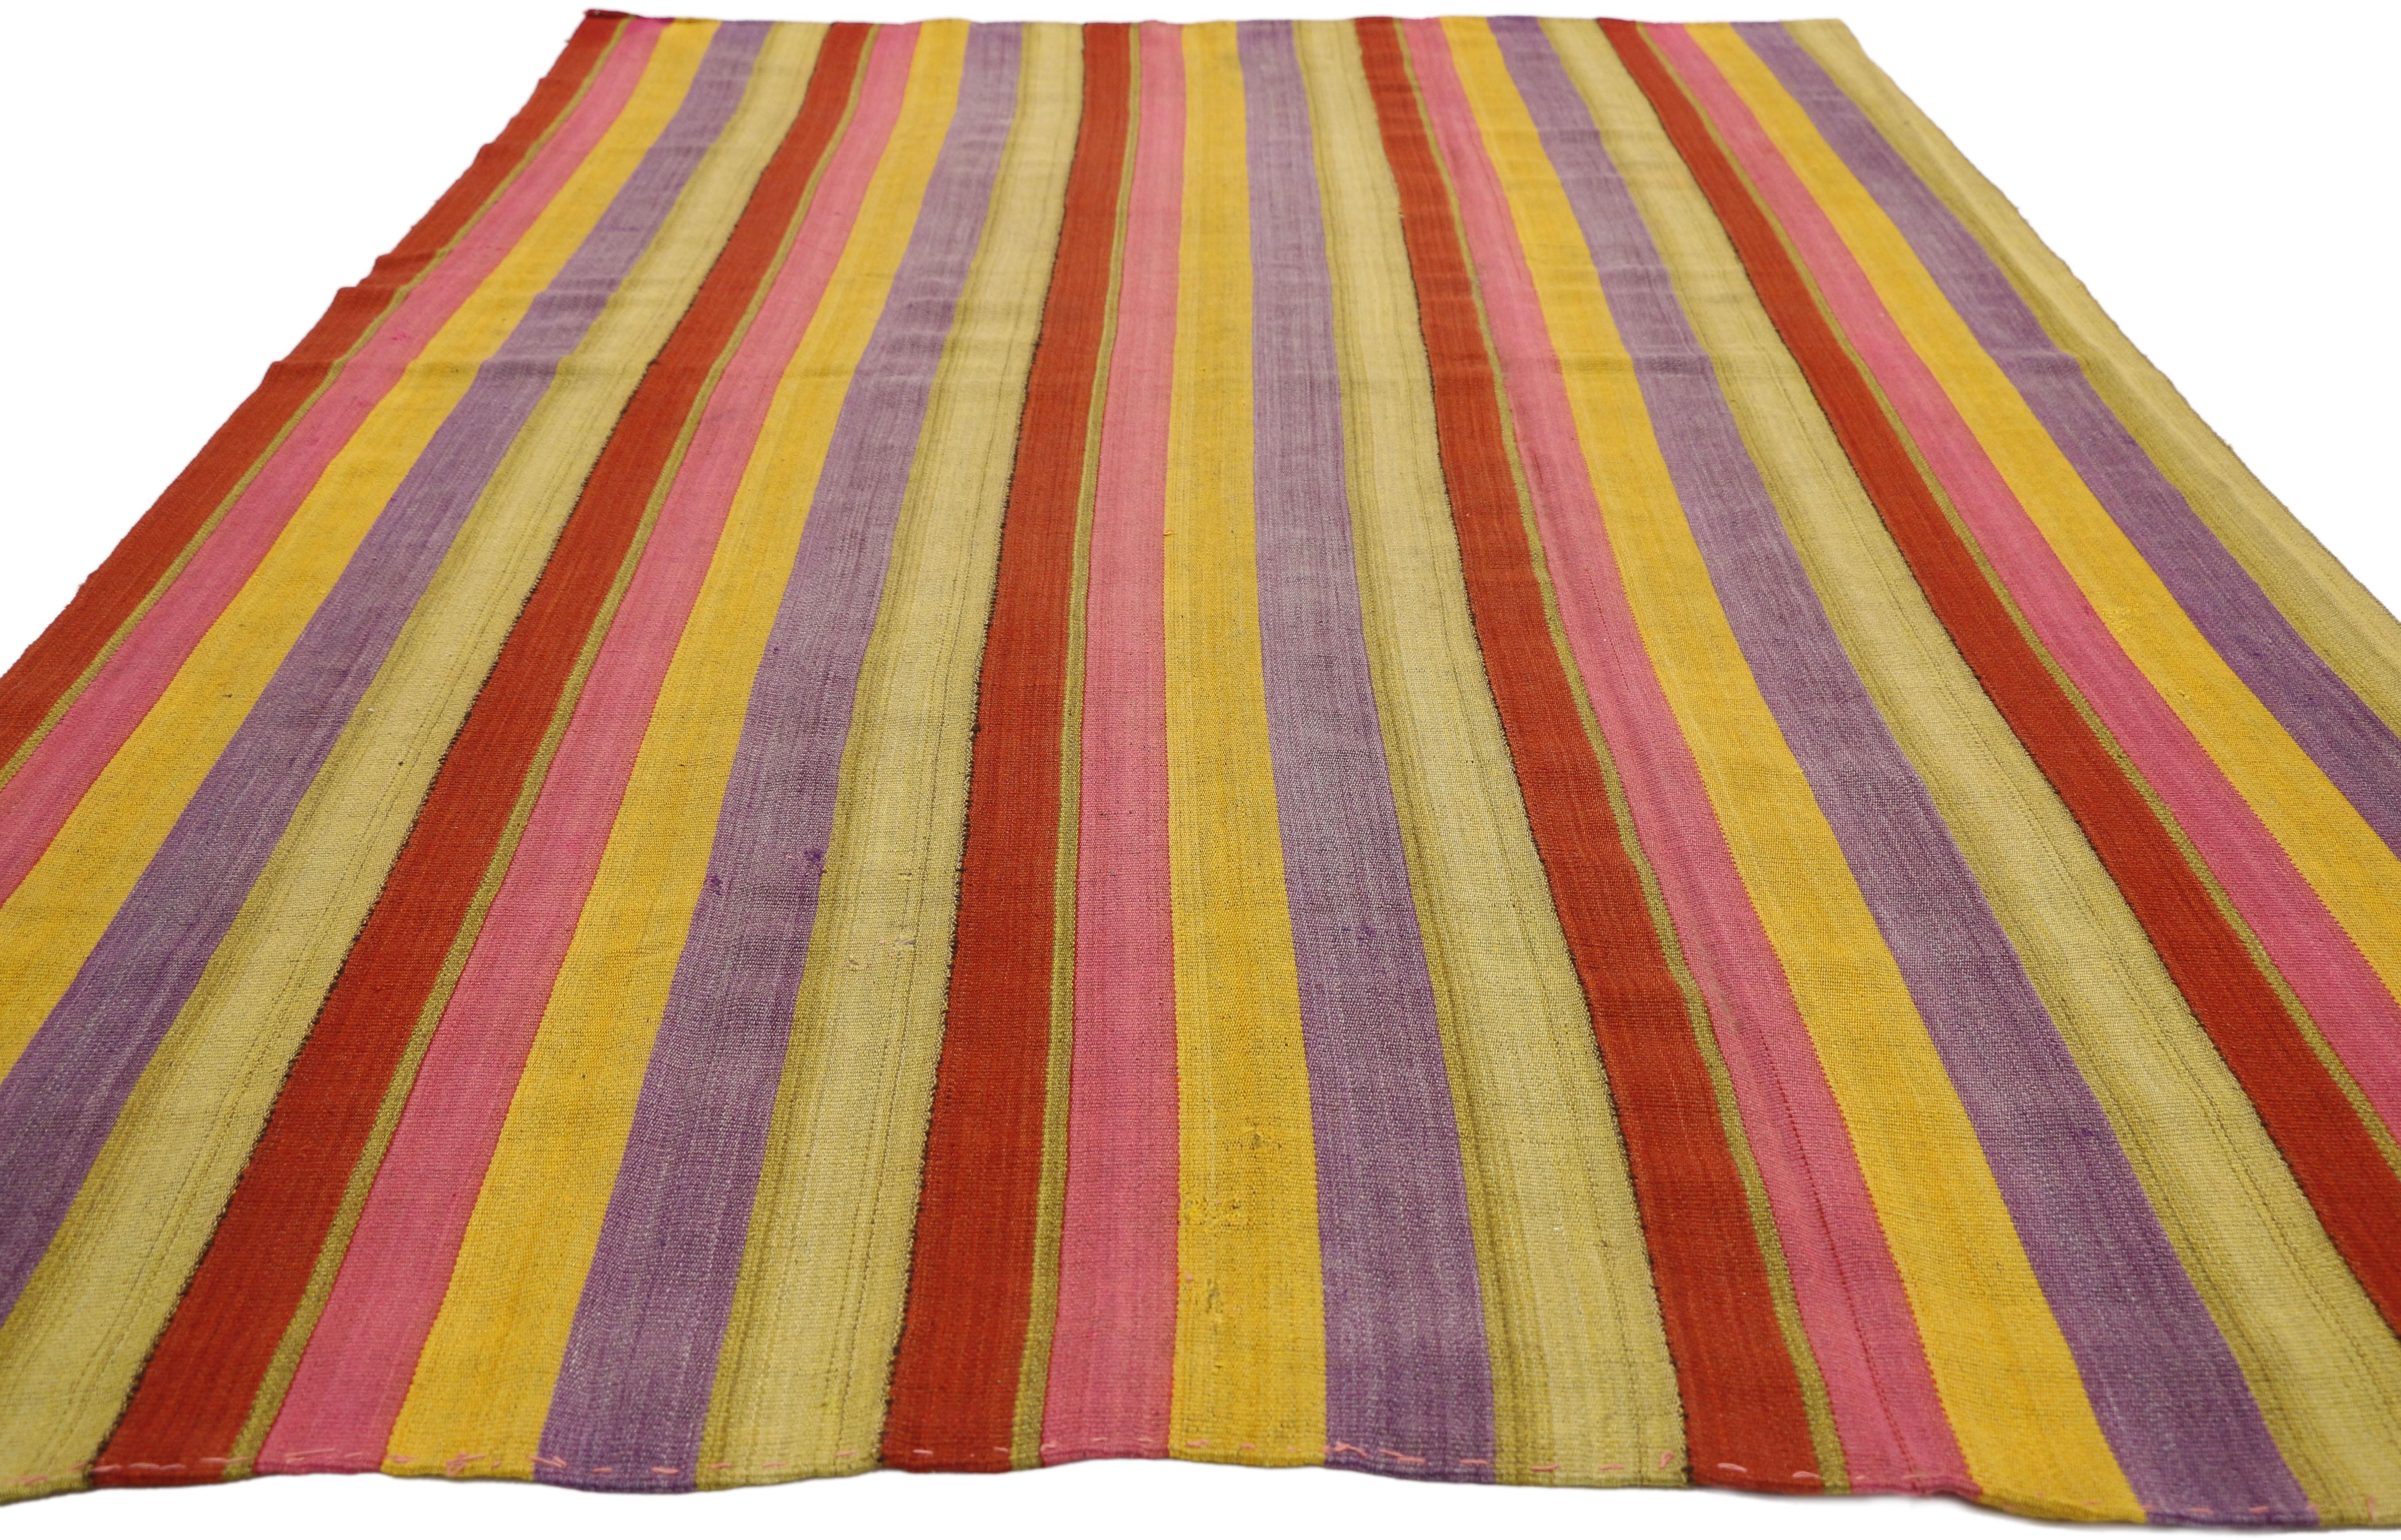 Hand-Woven Vintage Turkish Kilim Rug with Stripes in Modern Style, Striped Kilim Rug For Sale